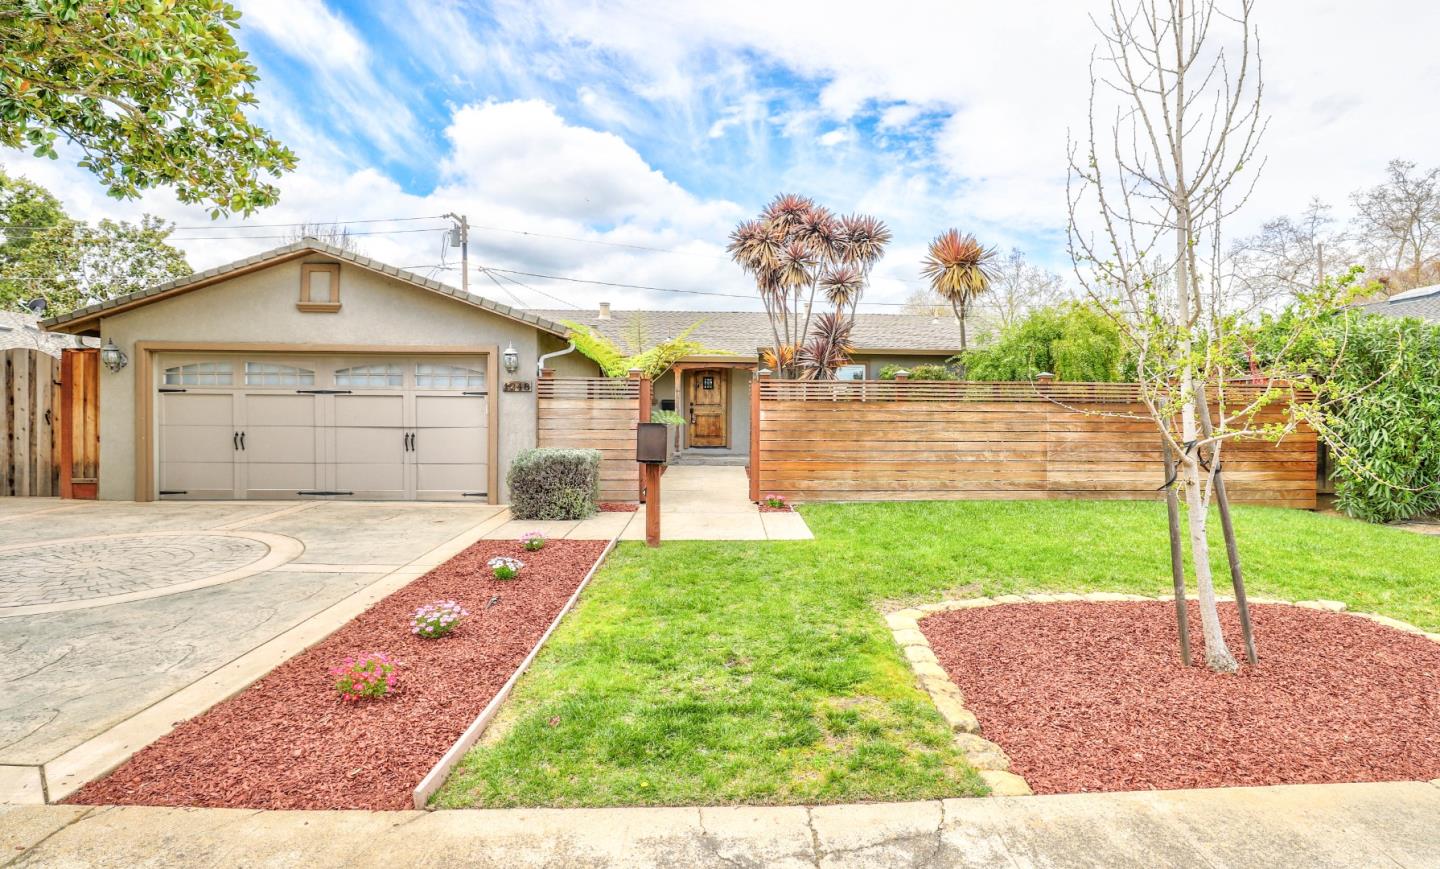 1248 Phyllis Ave, Mountain View, CA 94040